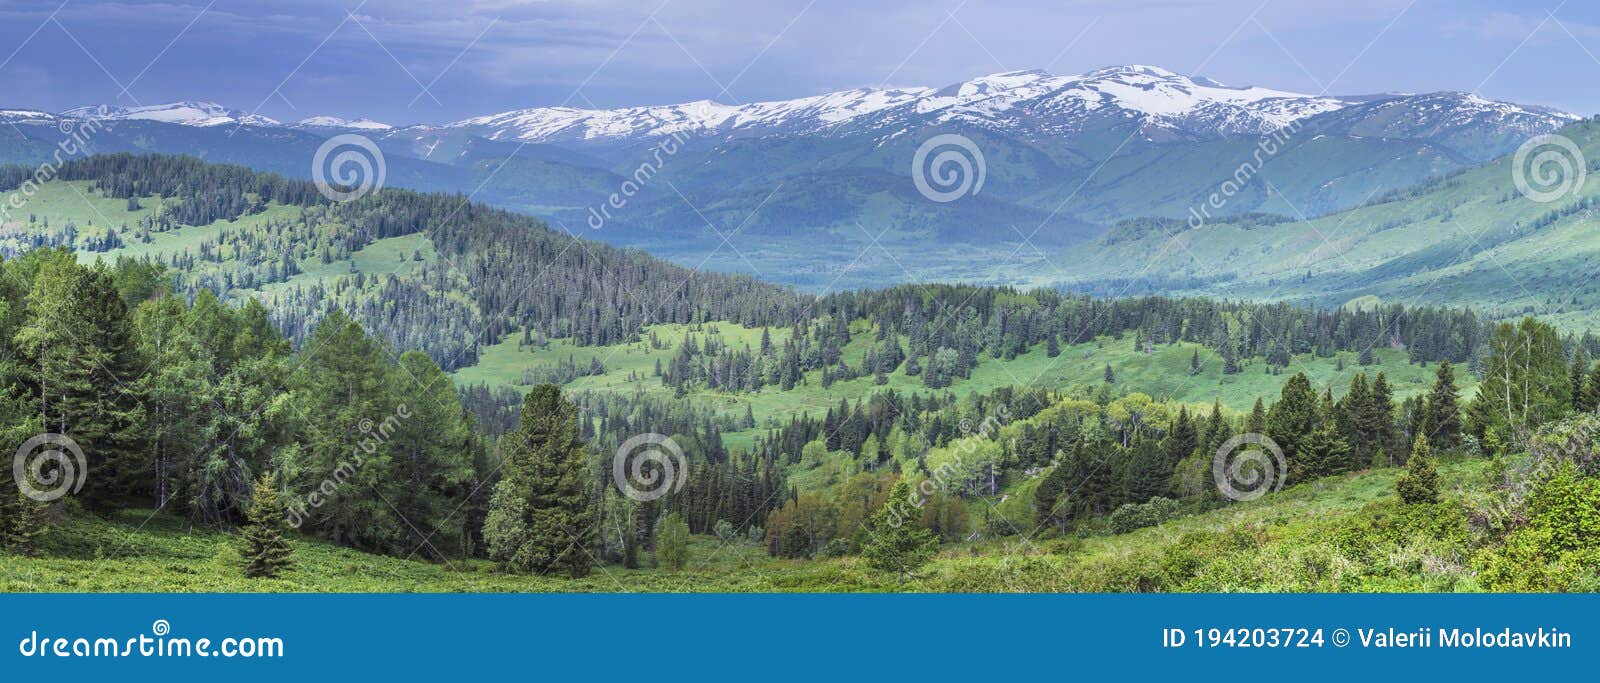 Panoramic View Of The Mountain Taiga Altay Summer Greens Of Forests